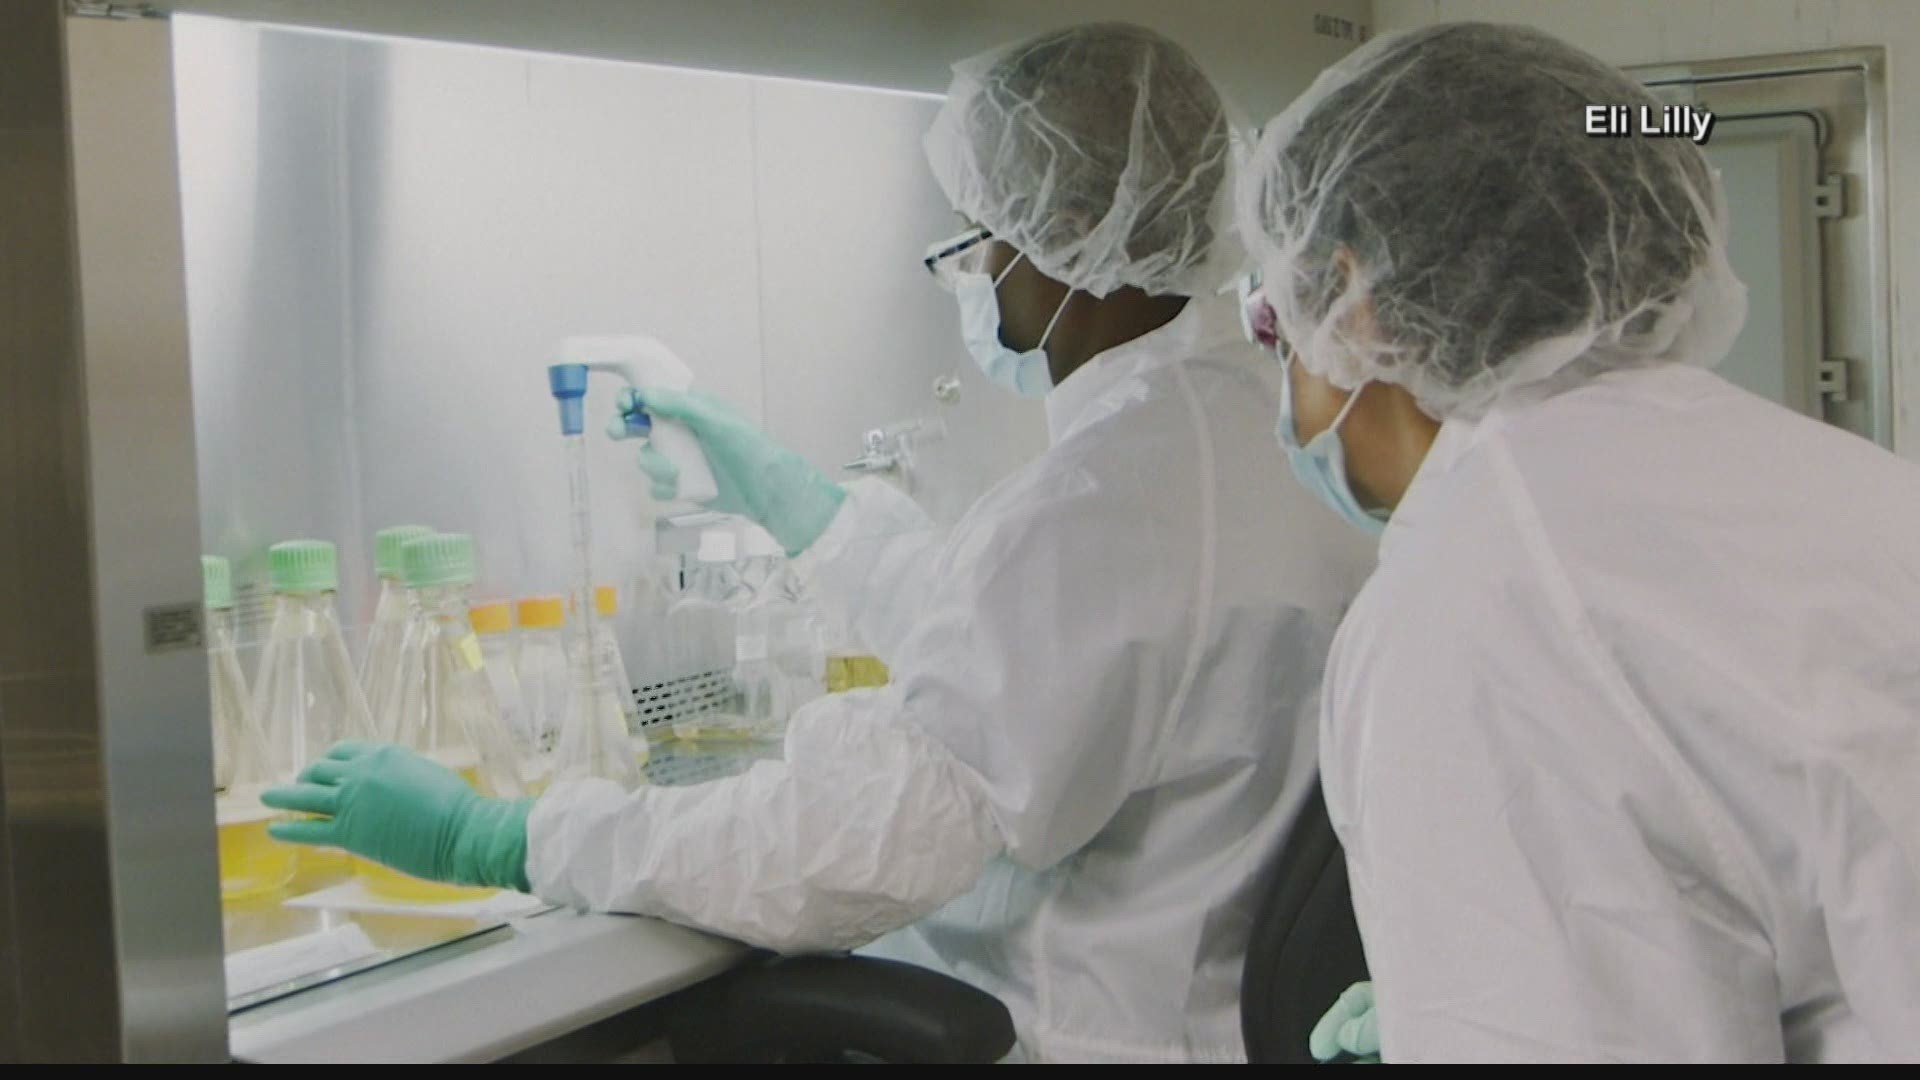 The Indianapolis-based drug maker is seeking expanded use approval and ramping up production.